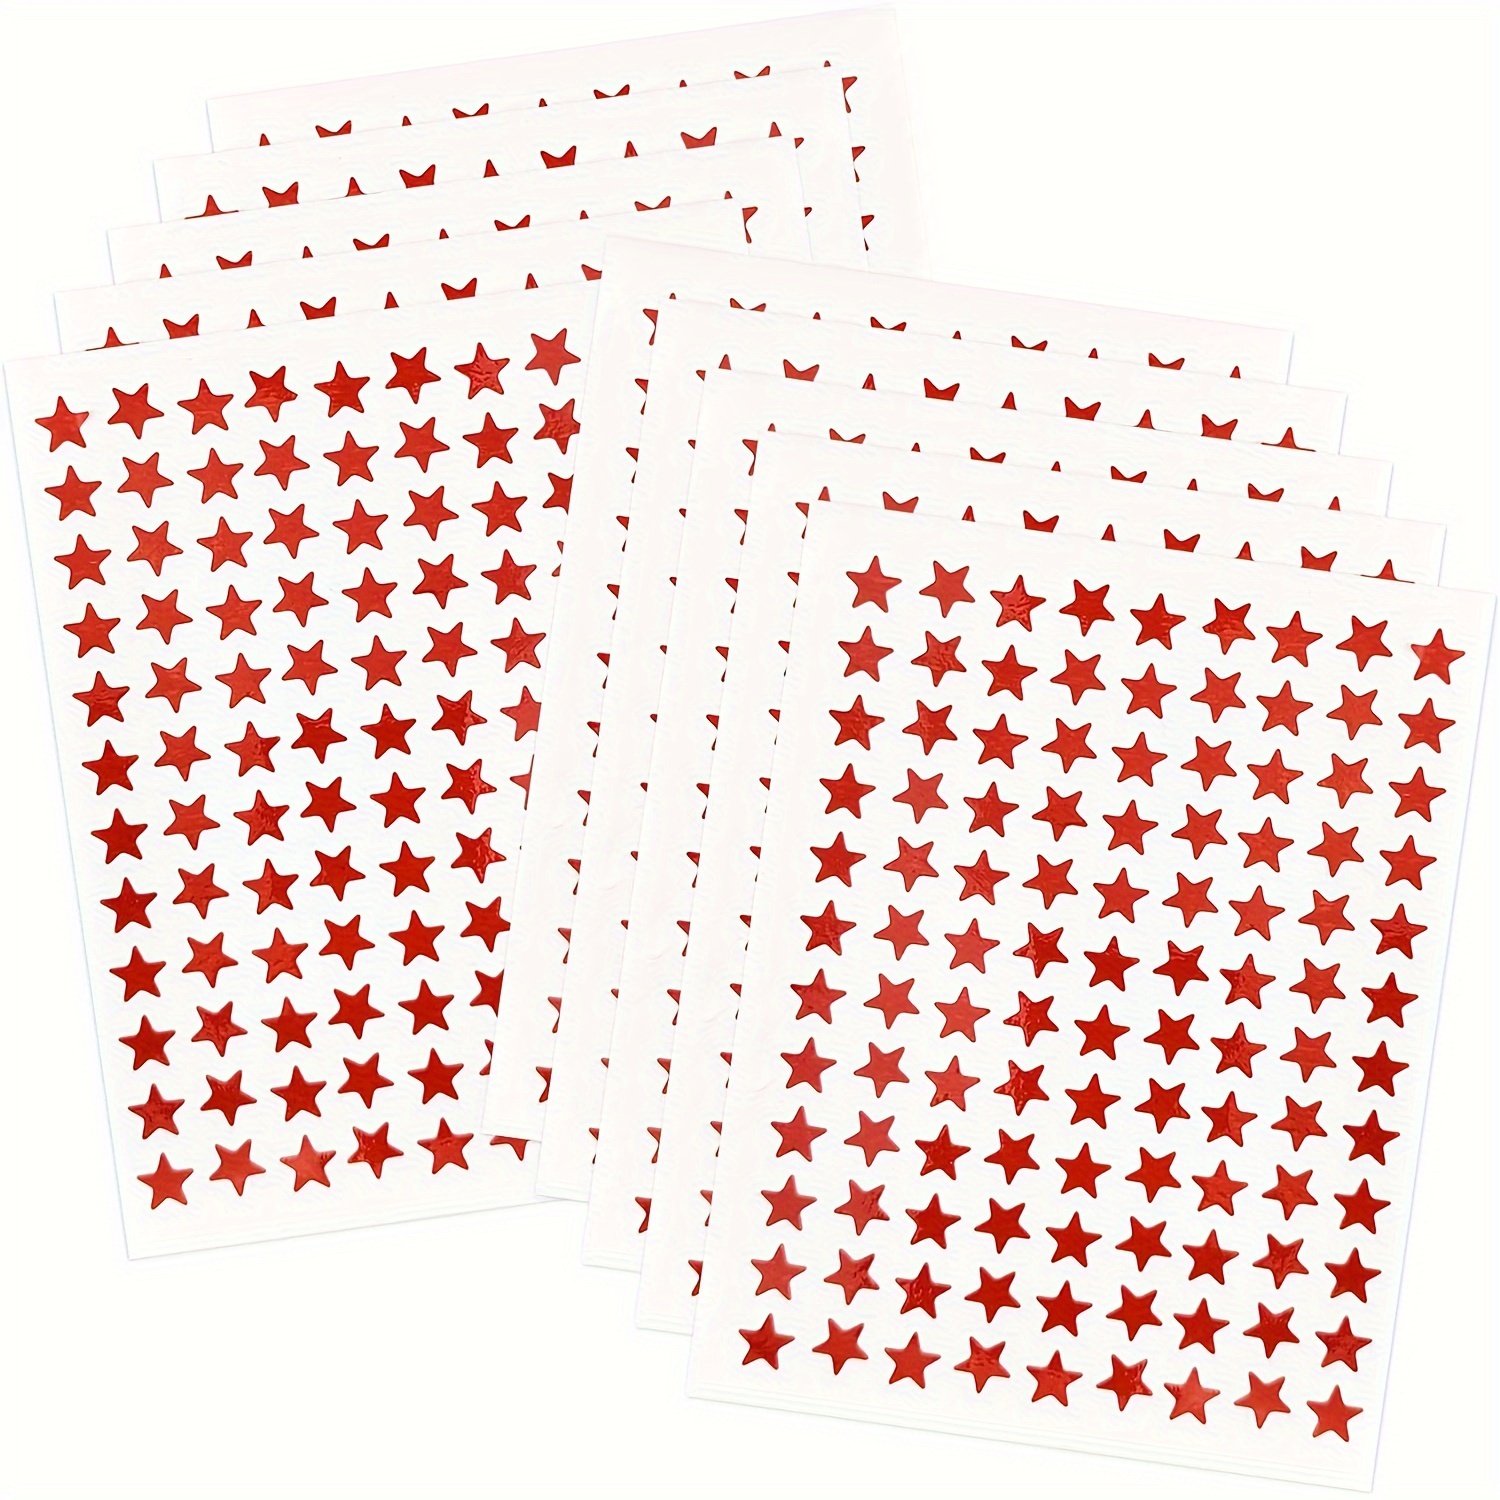  2,040 Gold Foil Star Stickers - Small Gold Star